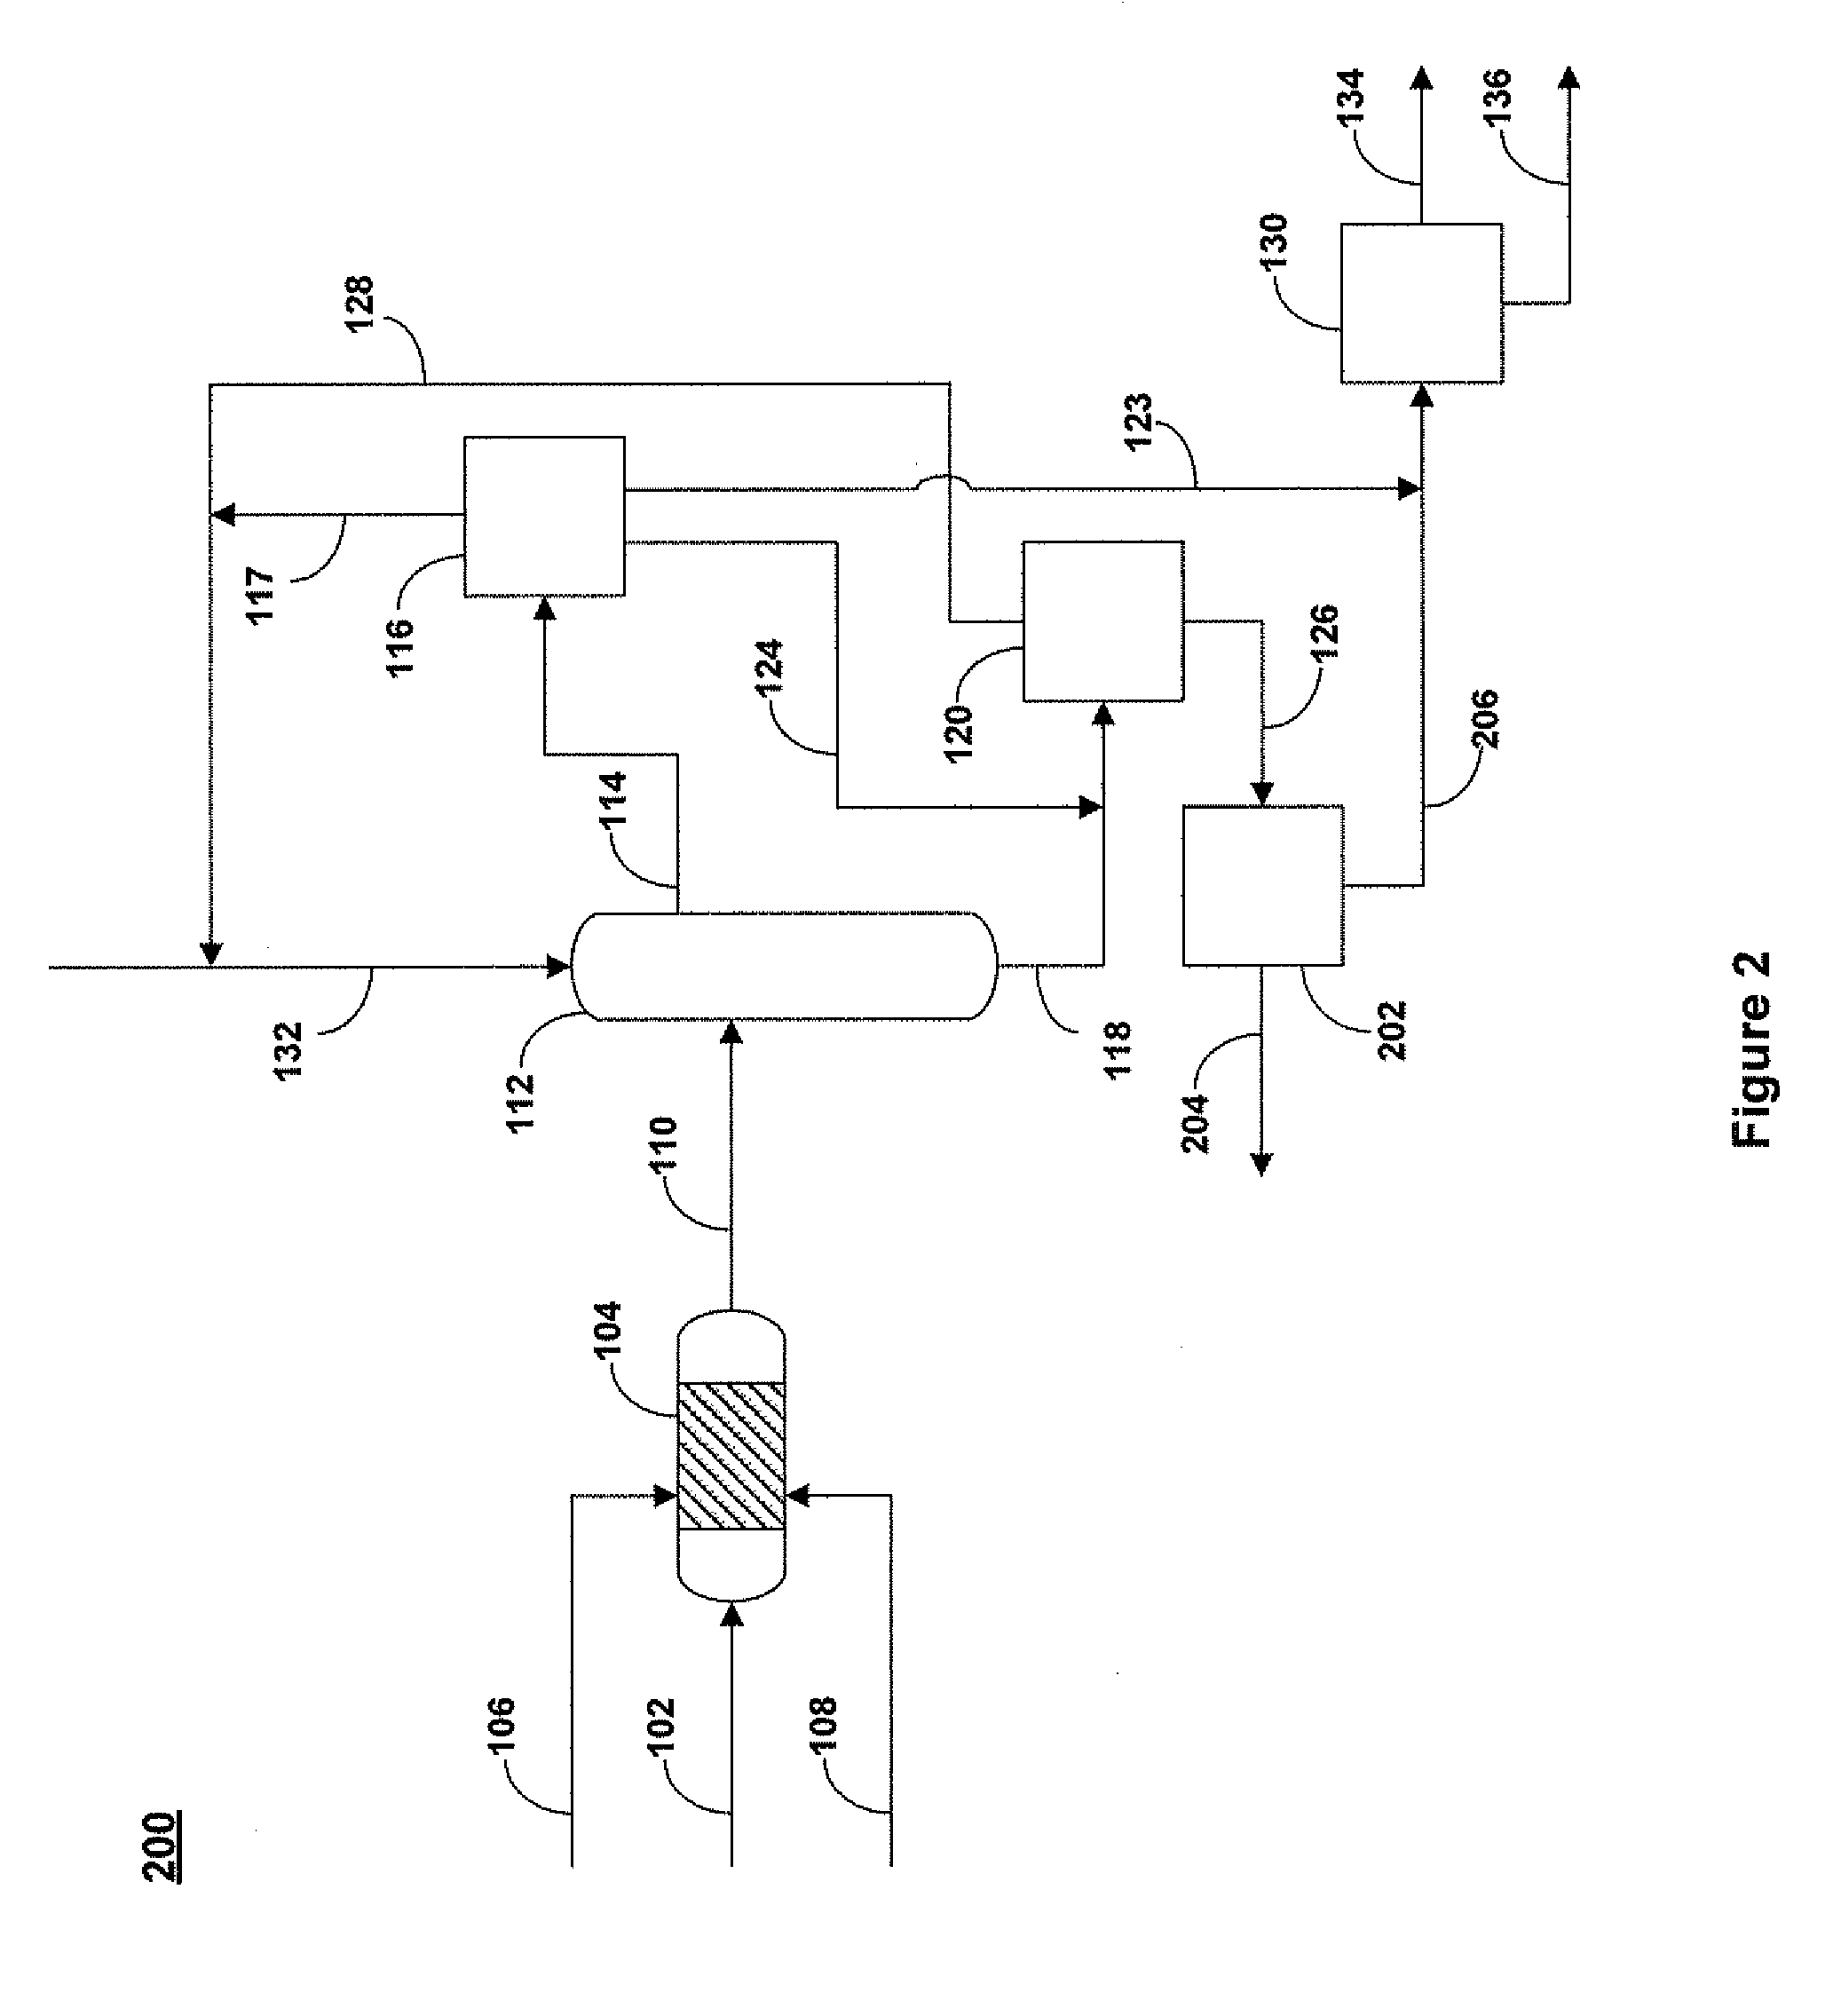 Process for Oxidative Desulfurization and Sulfone Disposal Using Solvent Deasphalting